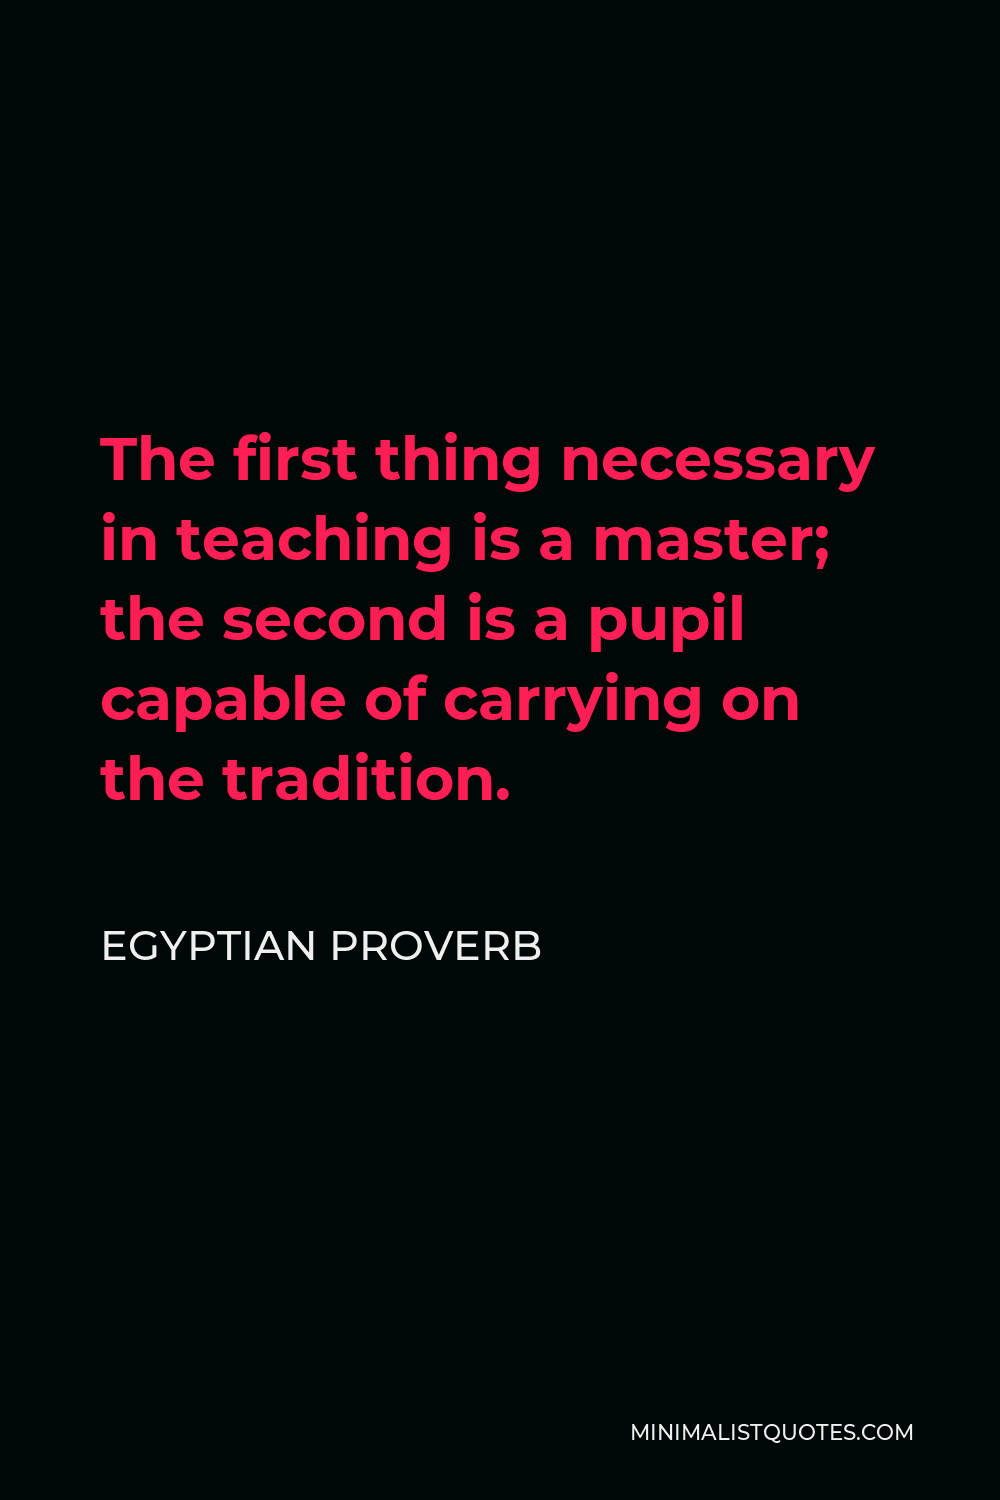 Egyptian Proverb Quote - The first thing necessary in teaching is a master; the second is a pupil capable of carrying on the tradition.